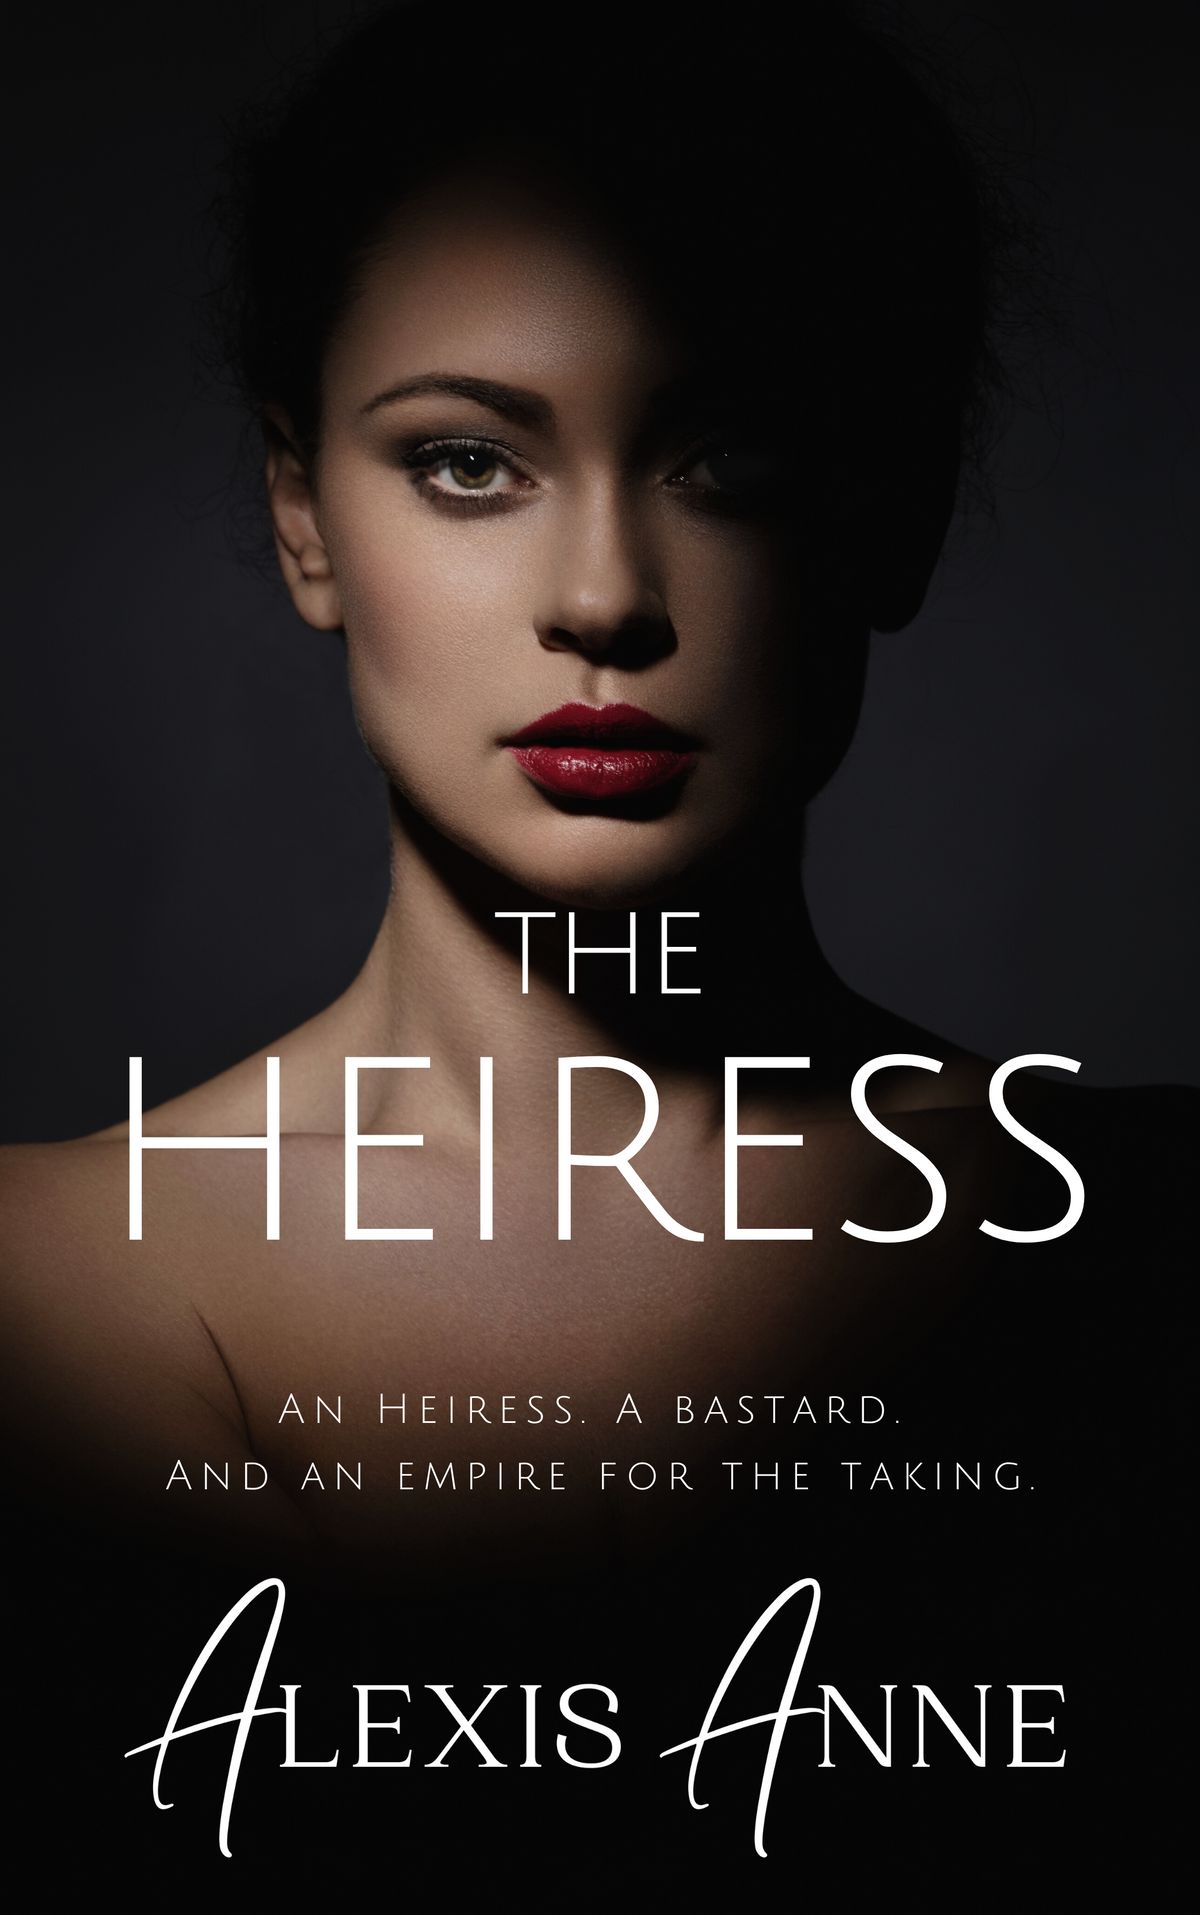 THE HEIRESS (THE EMPIRE TRILOGY #1) BY ALEXIS ANNE 